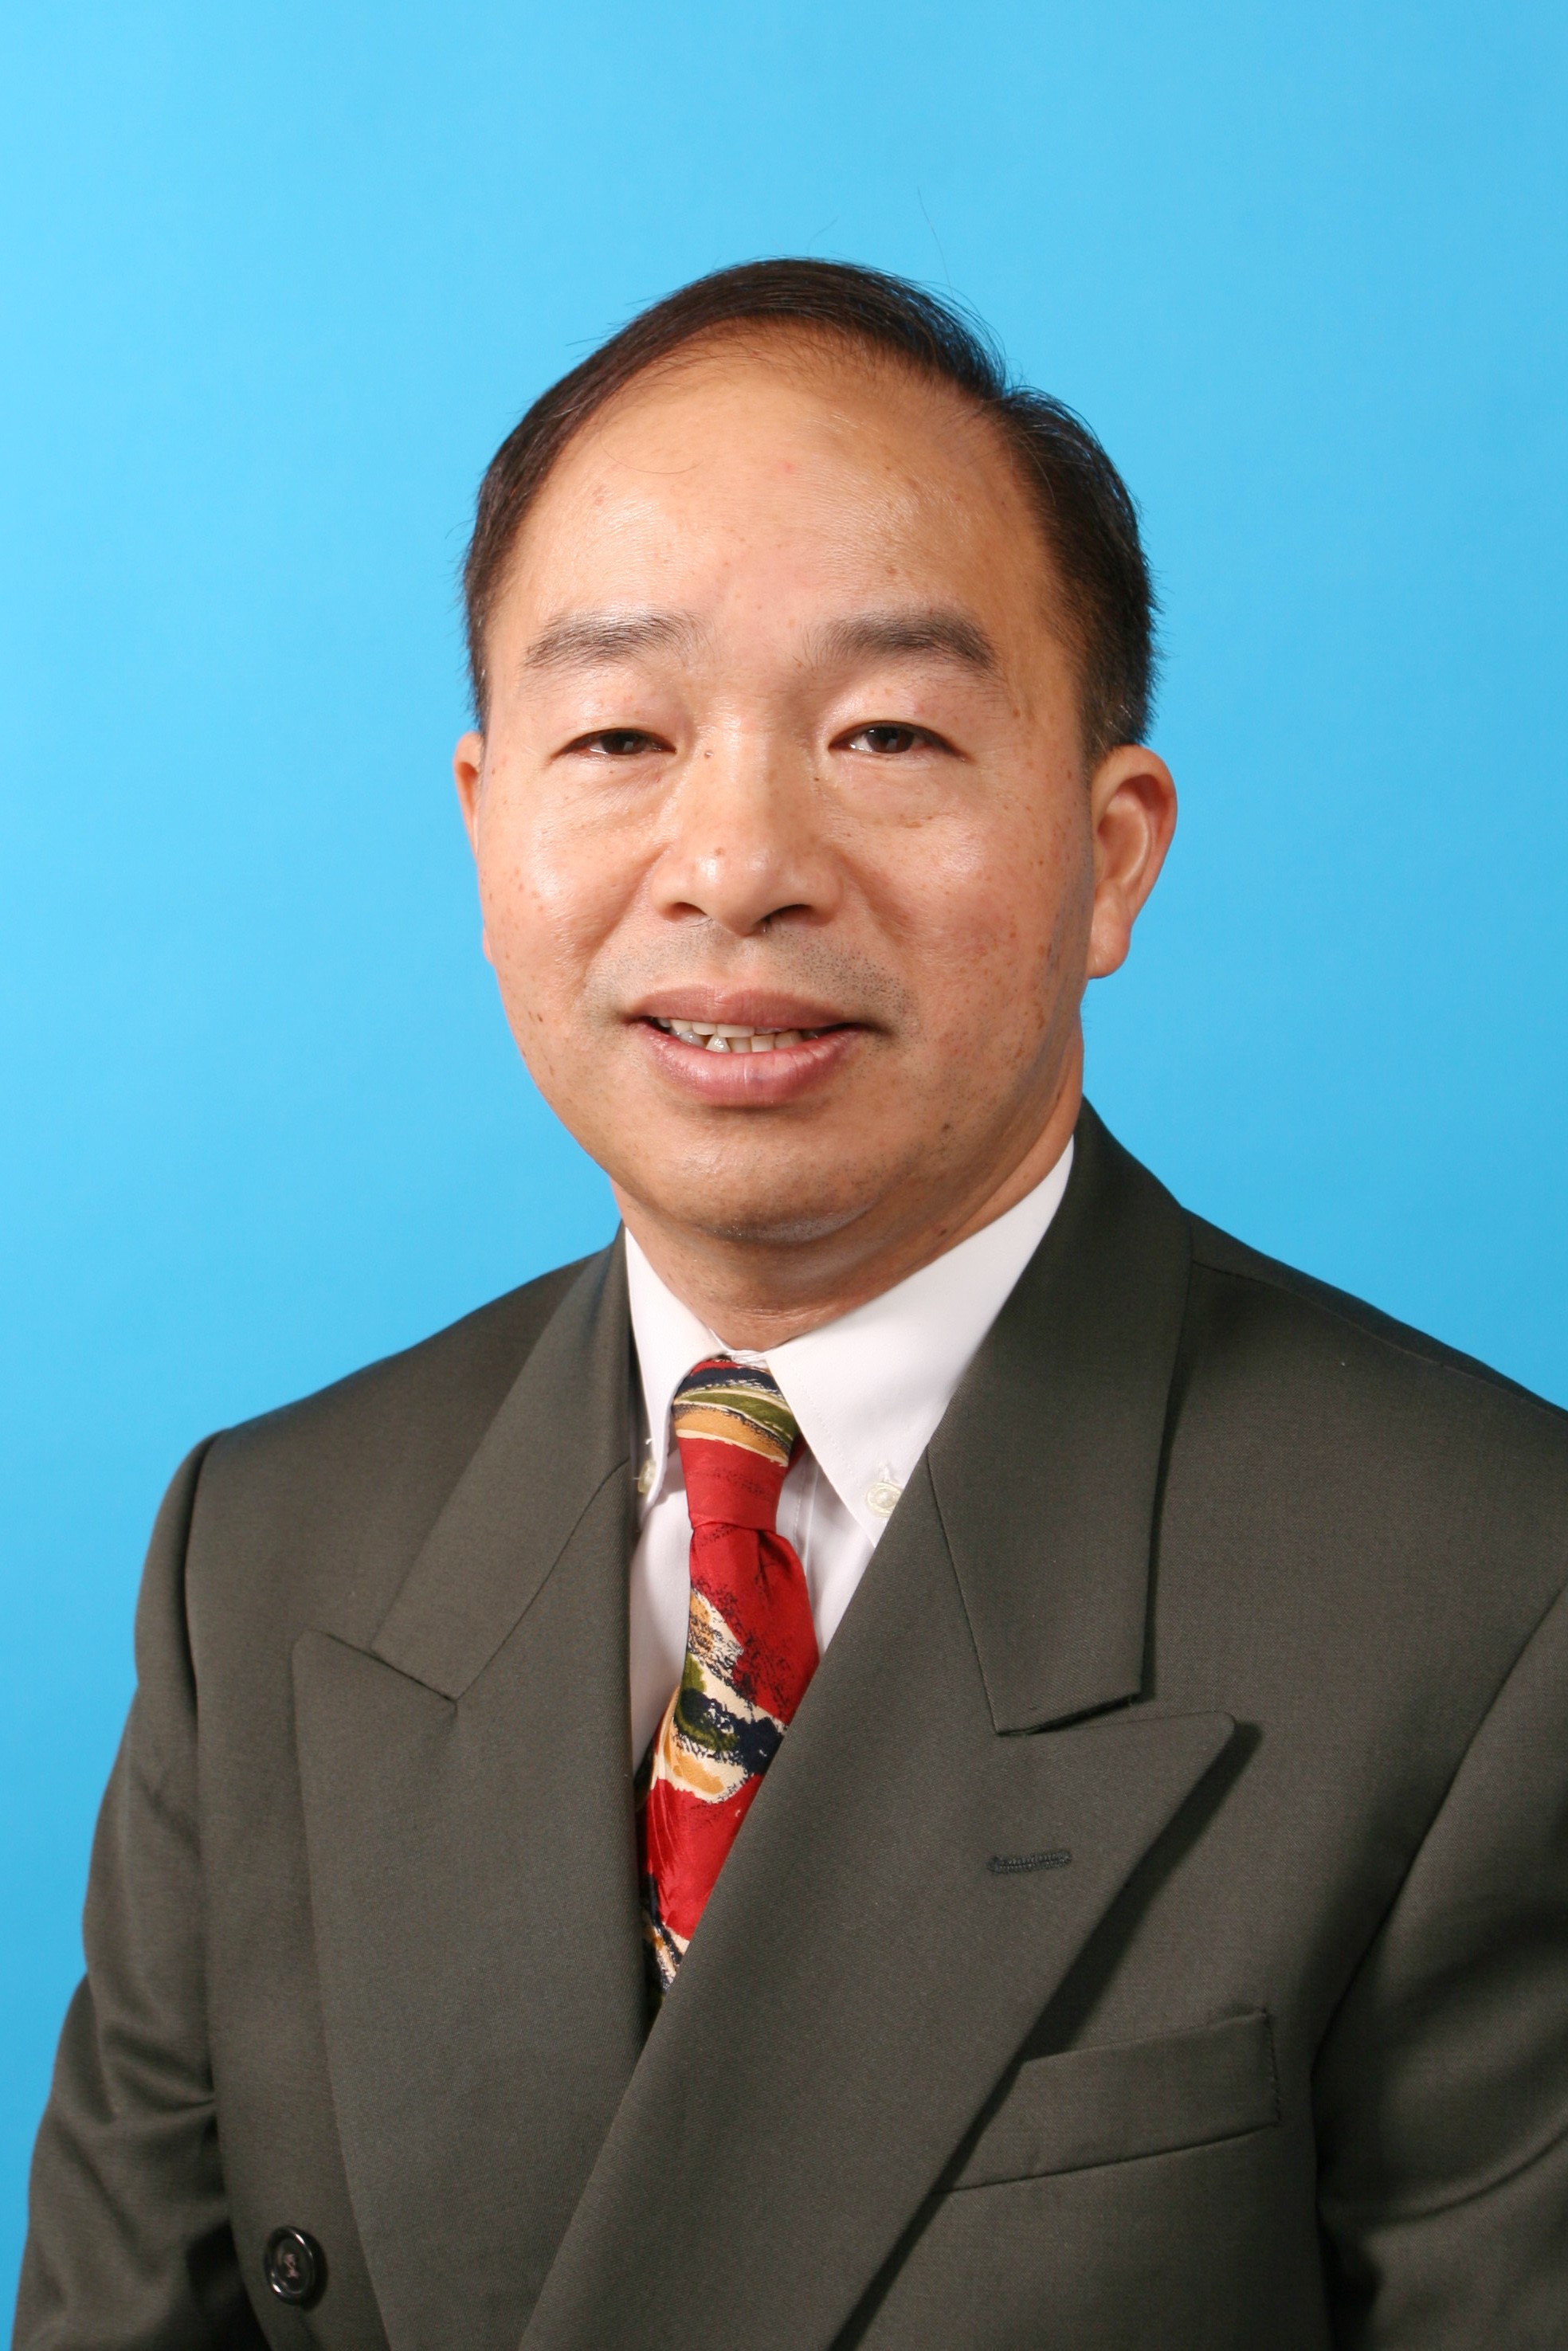 At WFC13 Professor Leung will present details of the latest filtration technology to fight the spread of viruses.